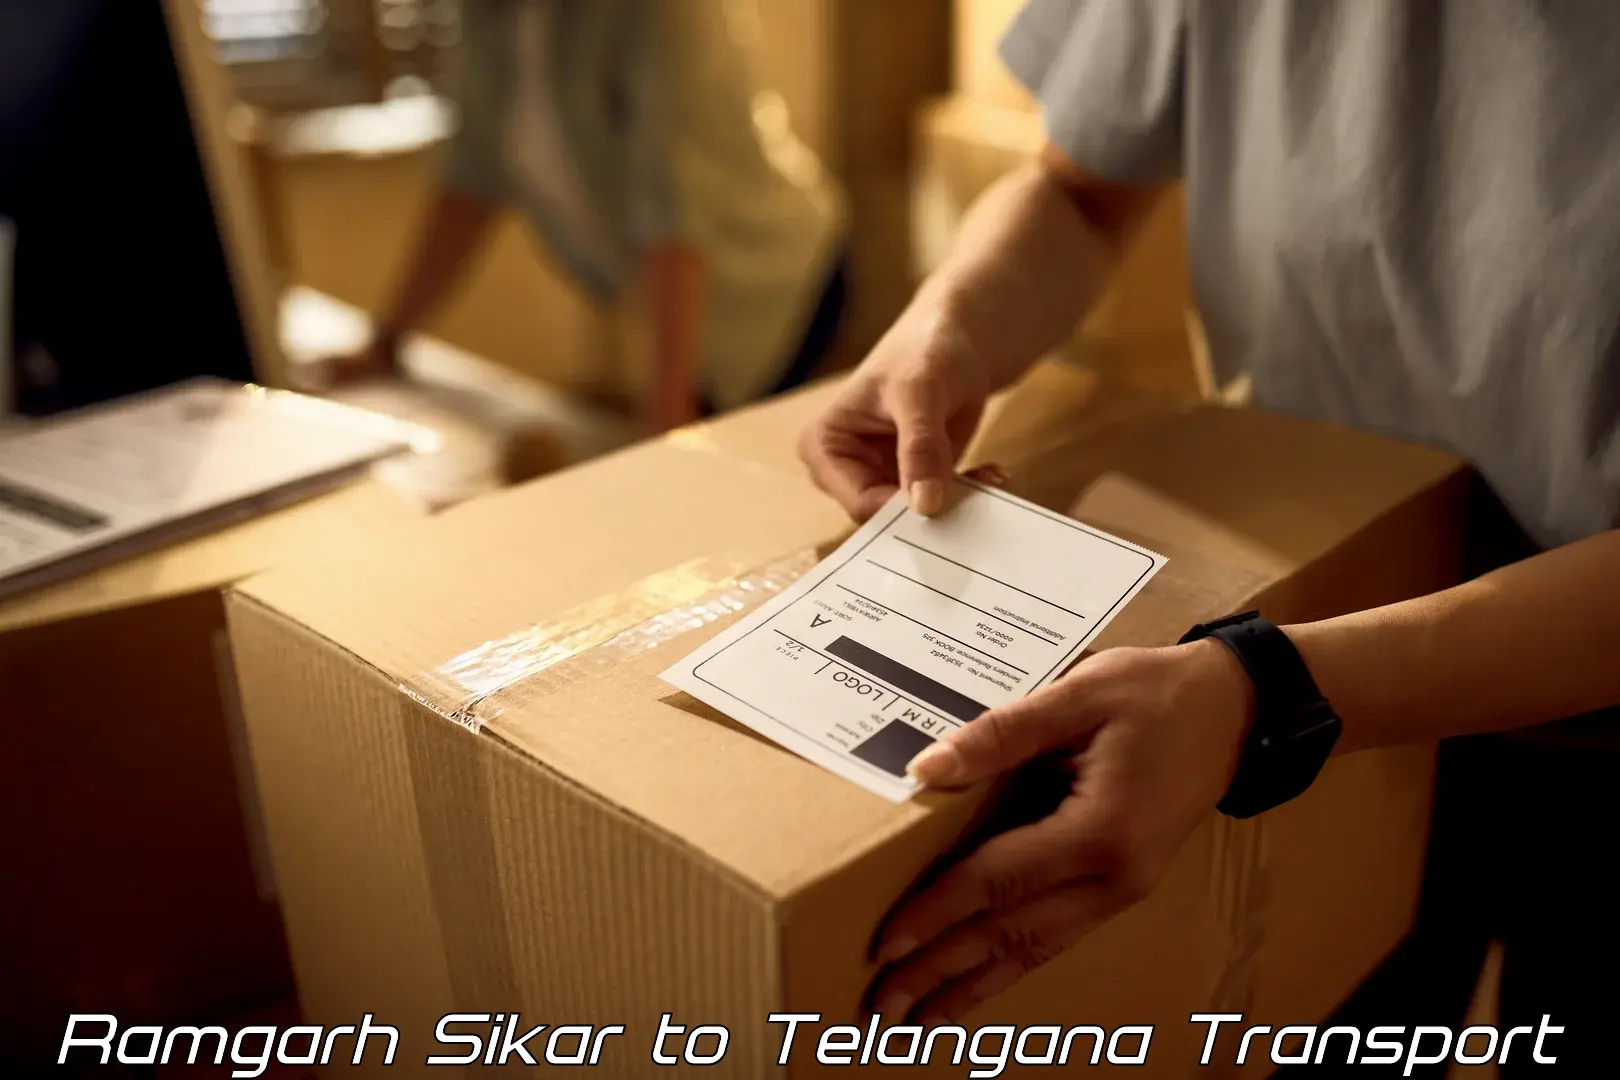 Domestic goods transportation services Ramgarh Sikar to Narayankhed